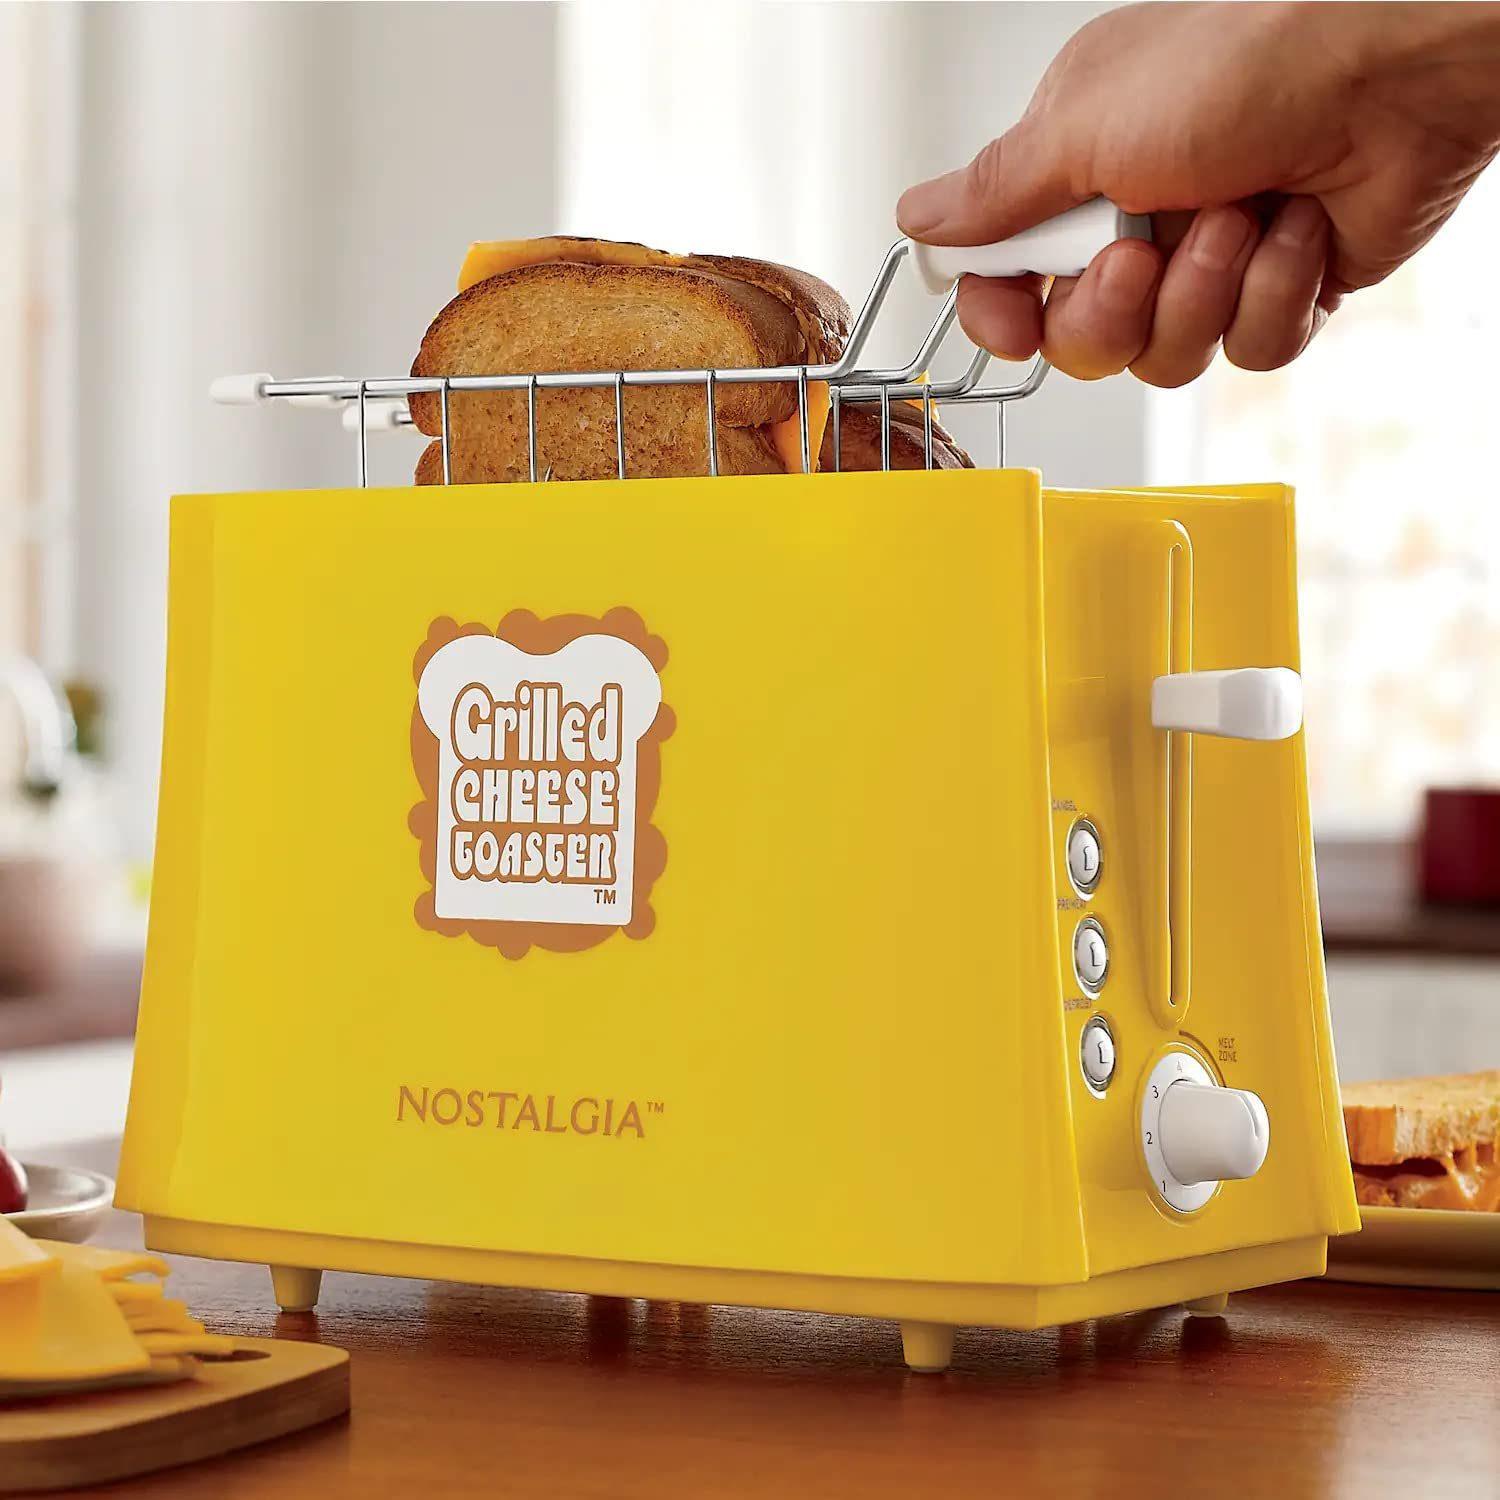 What Is A Grilled Cheese Toaster?